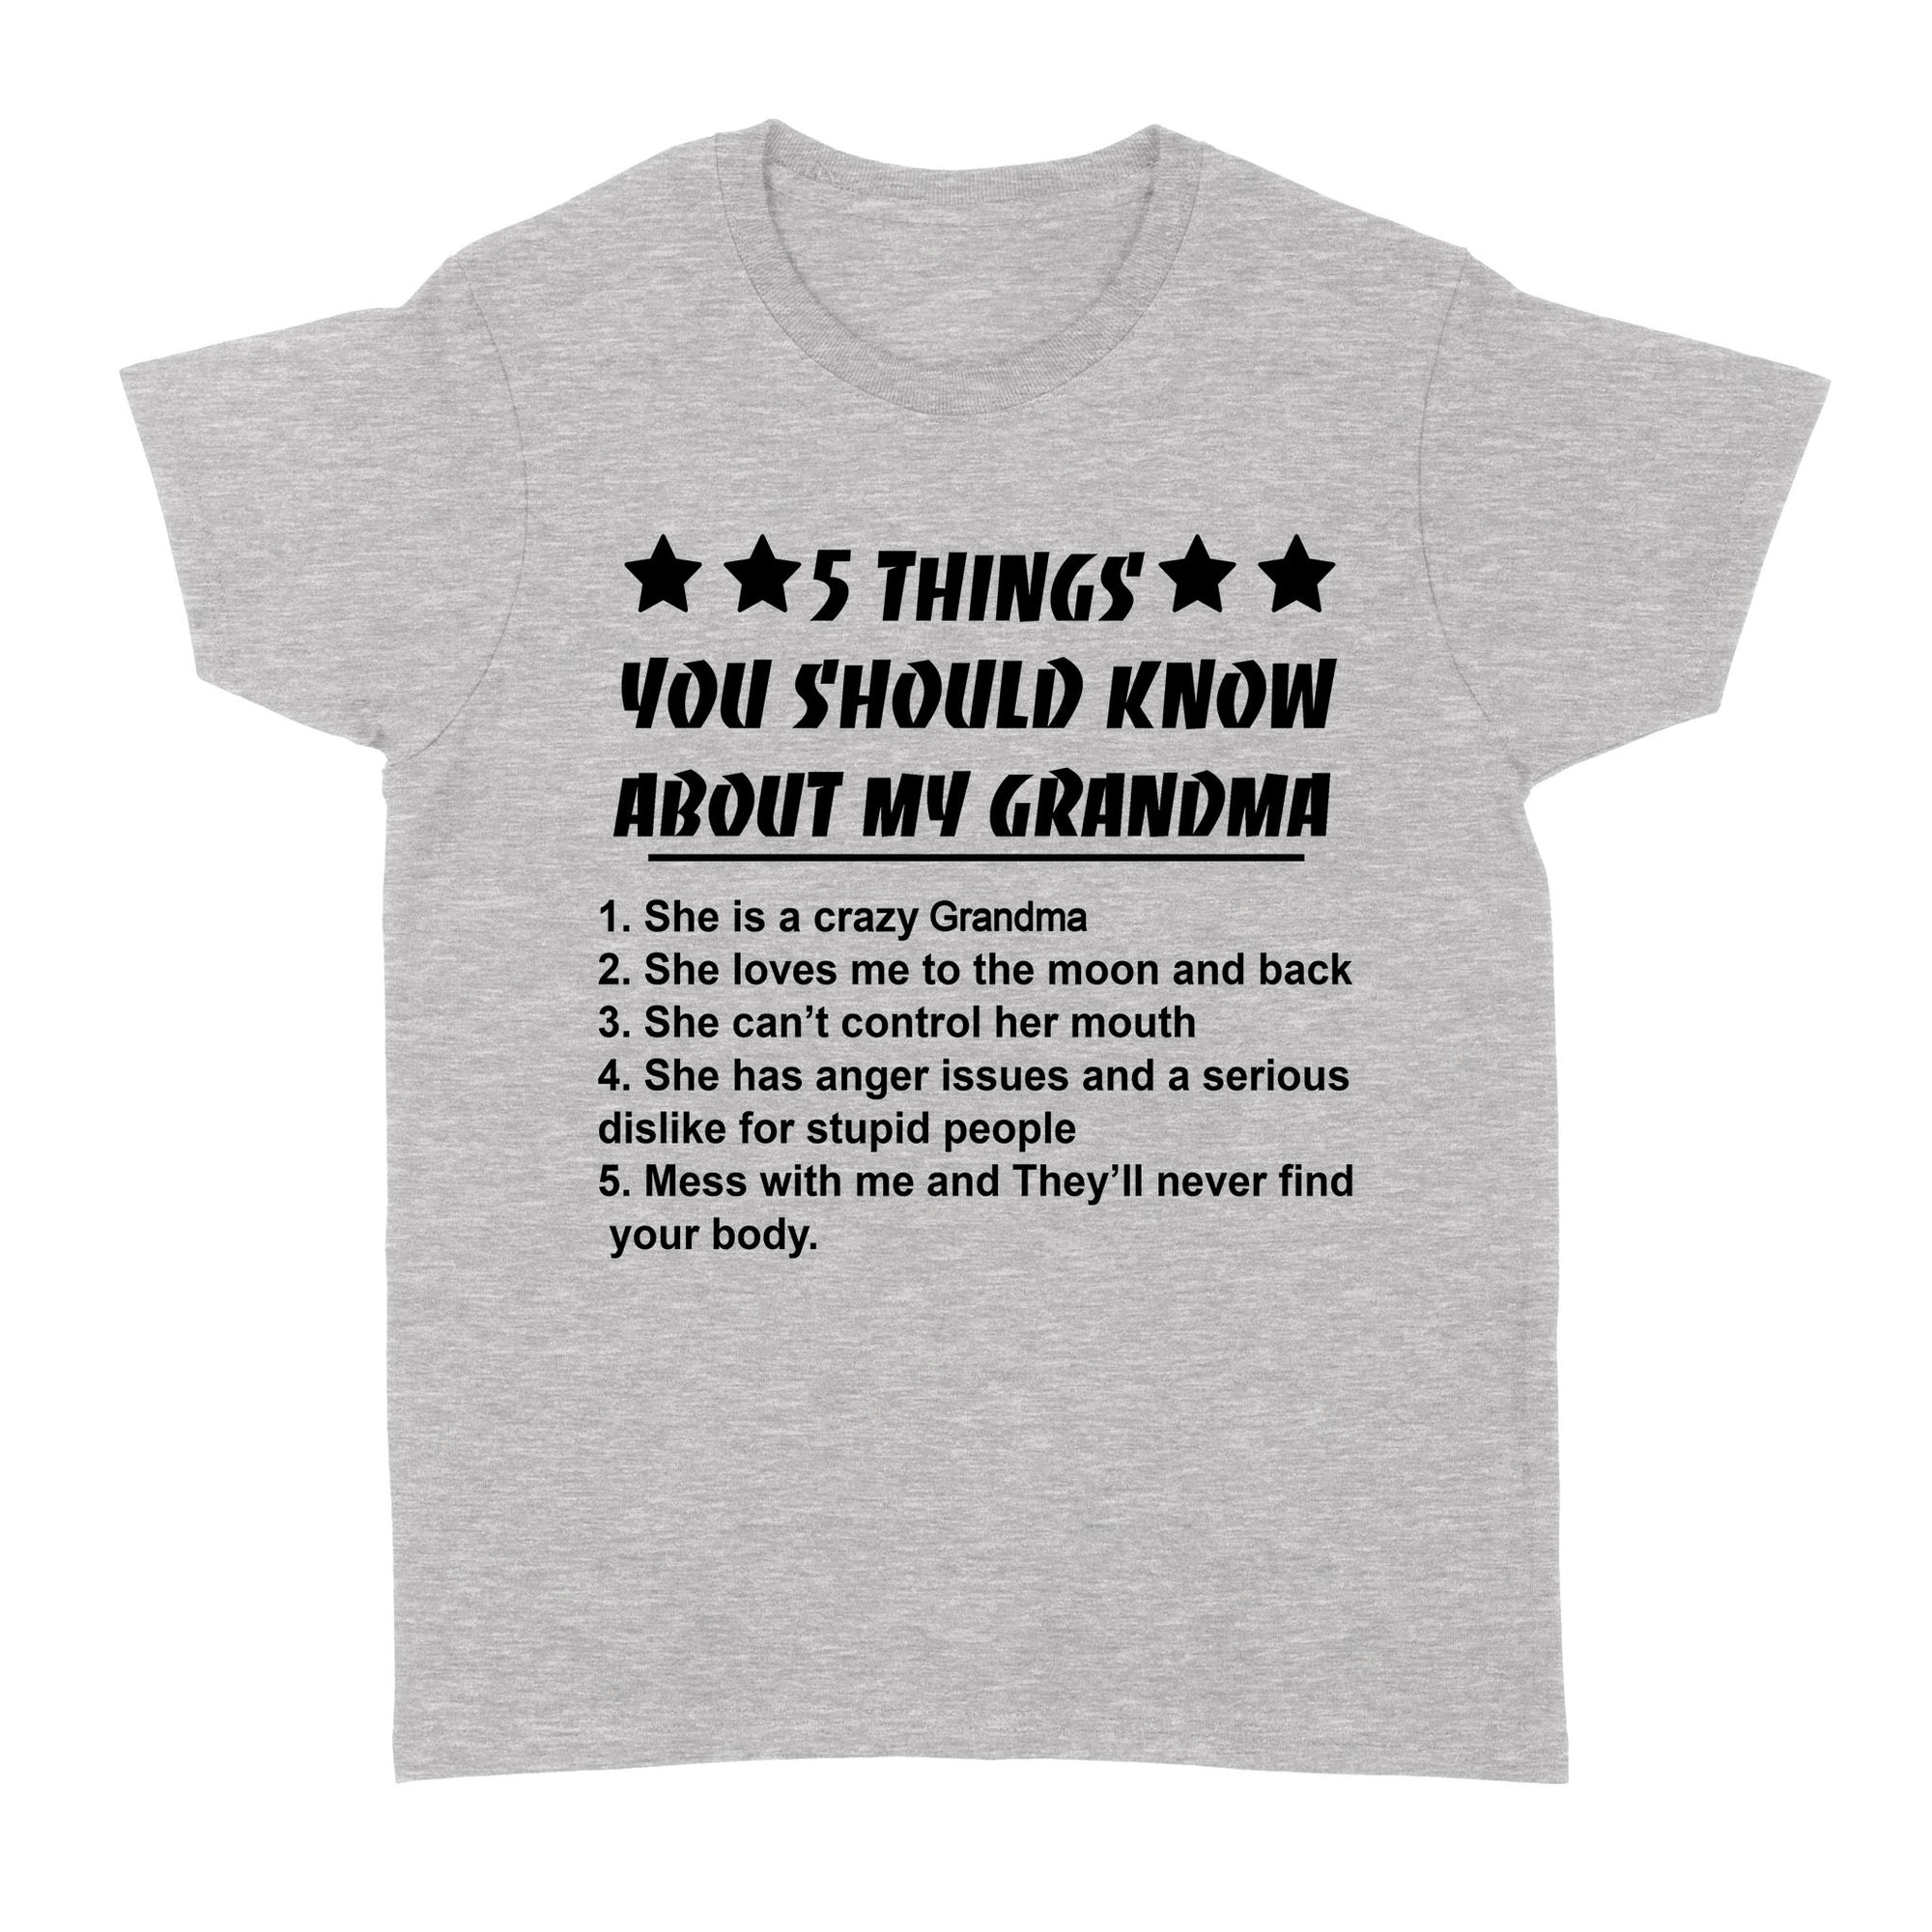 5 Things You Should Know About My Grandma, She Is A Crazy Grandma Standard Women's T-shirt